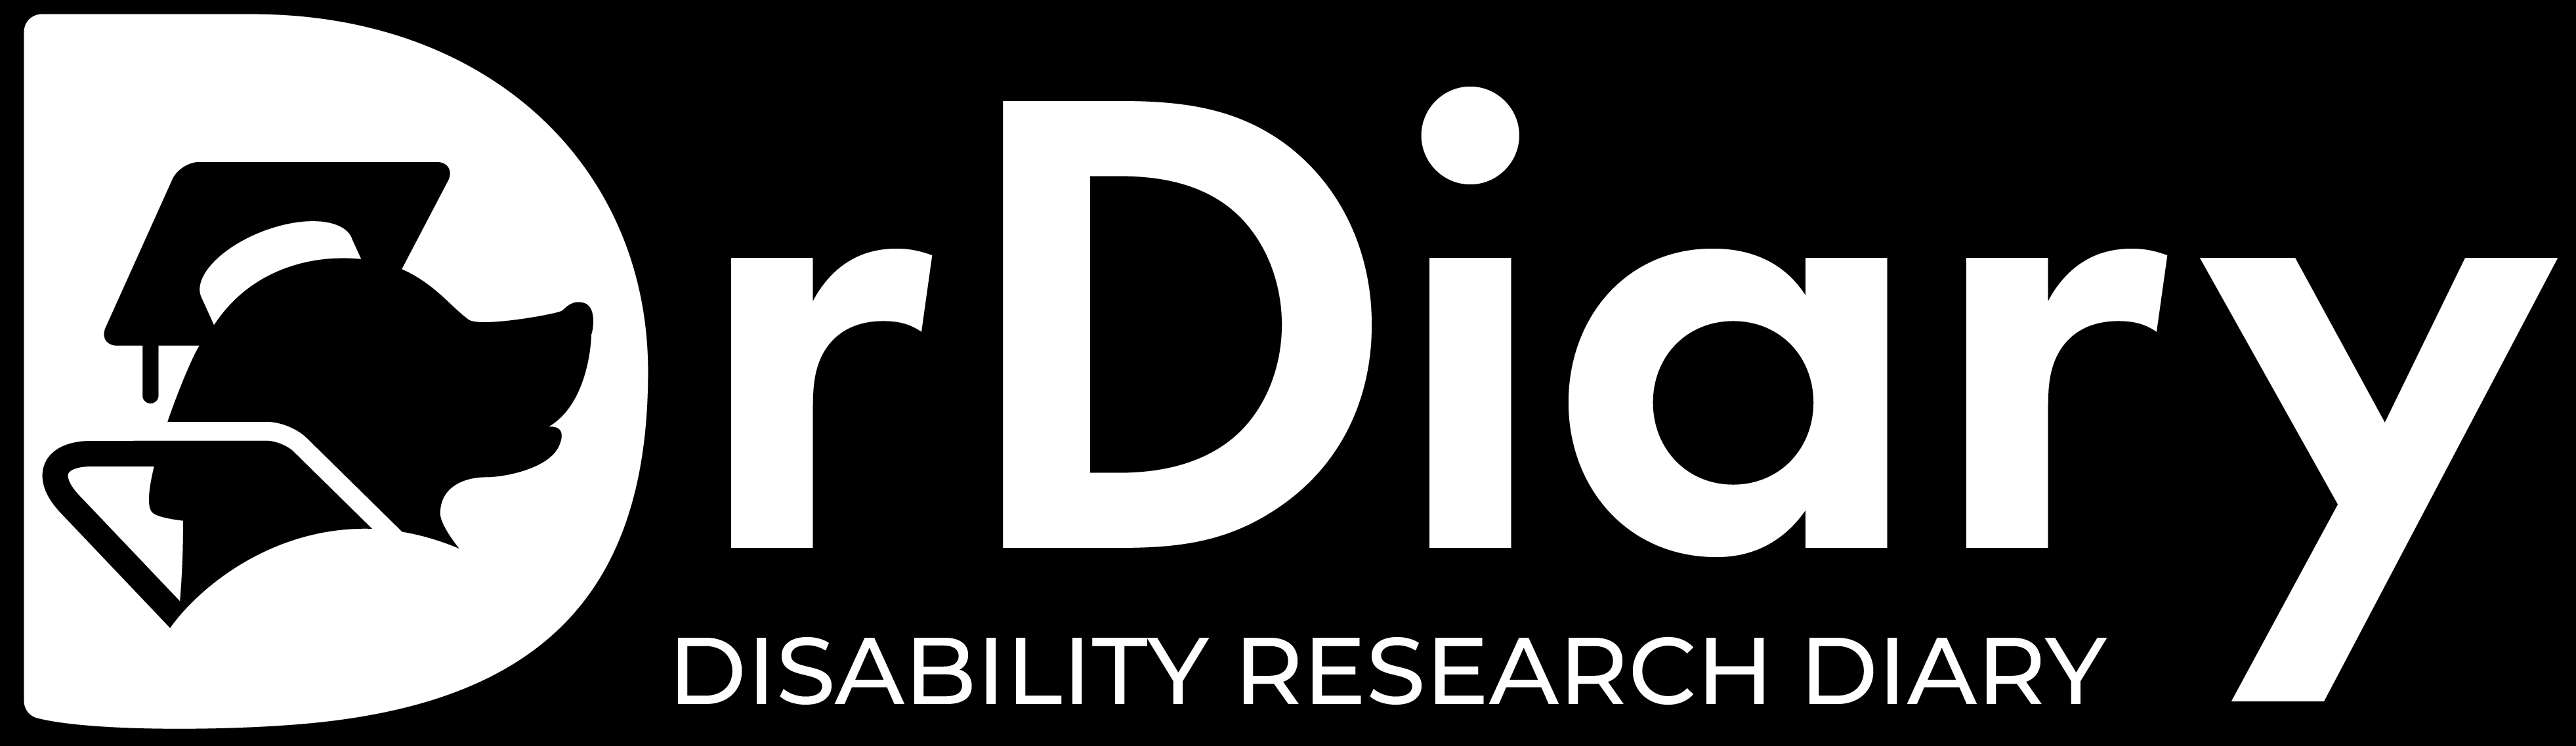 Logo of Disability Reserach Diary. THe D has a guide dog with a graduation cap in it